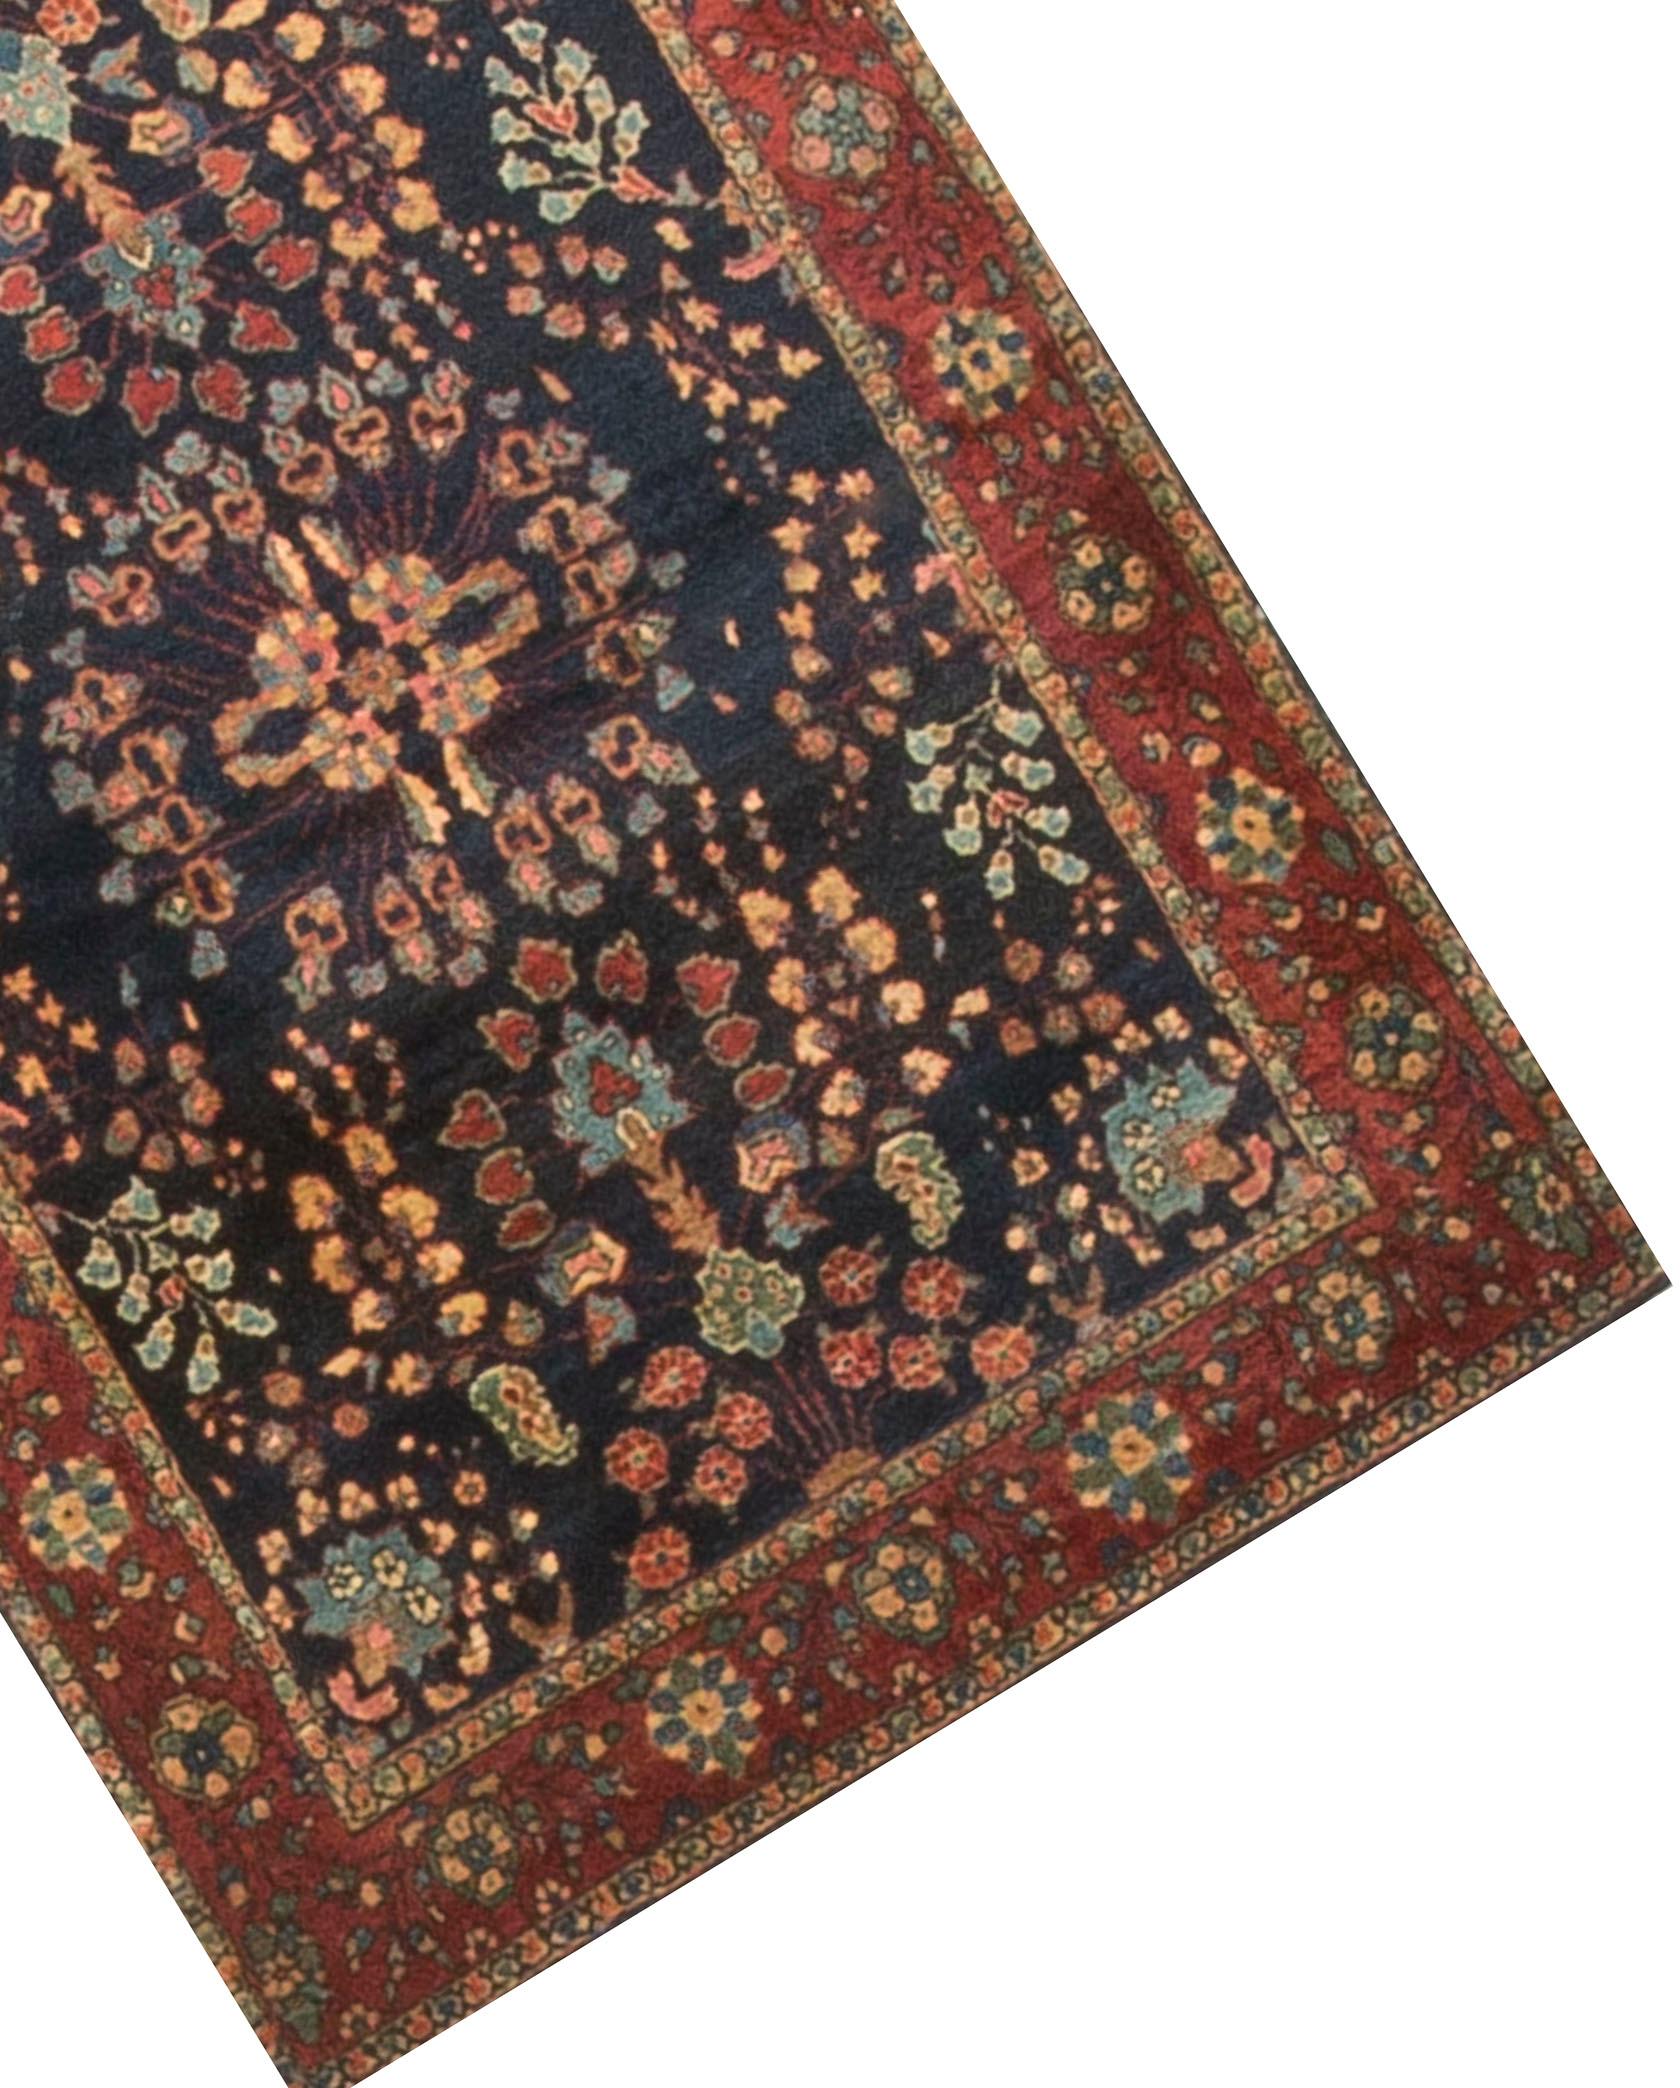 The dramatic main field in this small 1940s Persian Sarouk will shine in any setting, the softer red border adds emphasis to the glorious floral designs in the field of the rug.

 